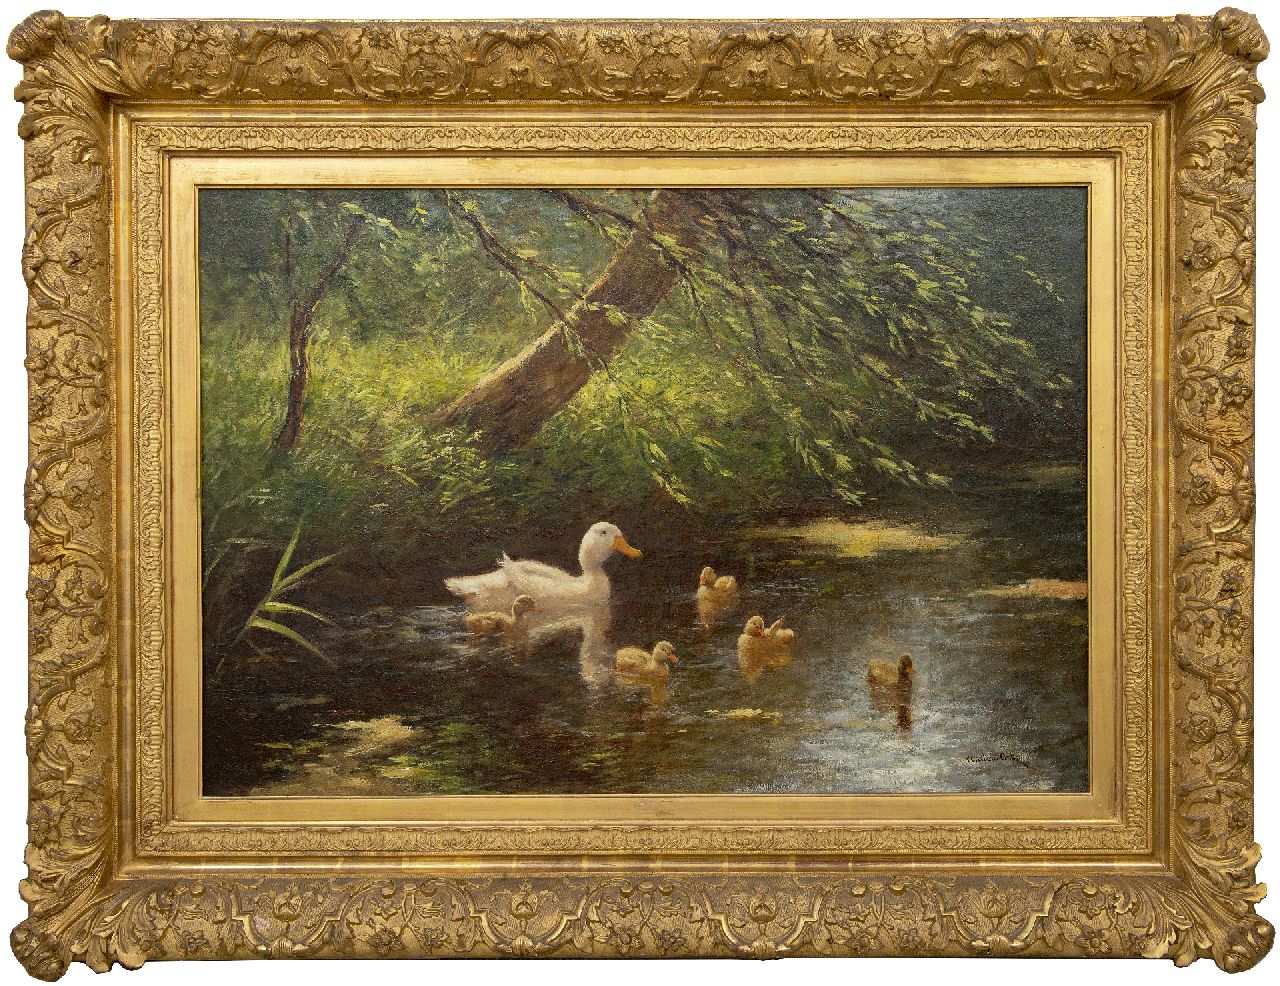 Artz C.D.L.  | 'Constant' David Ludovic Artz, Duck with ducklings in a ditch, oil on canvas 65.4 x 95.4 cm, signed l.r.